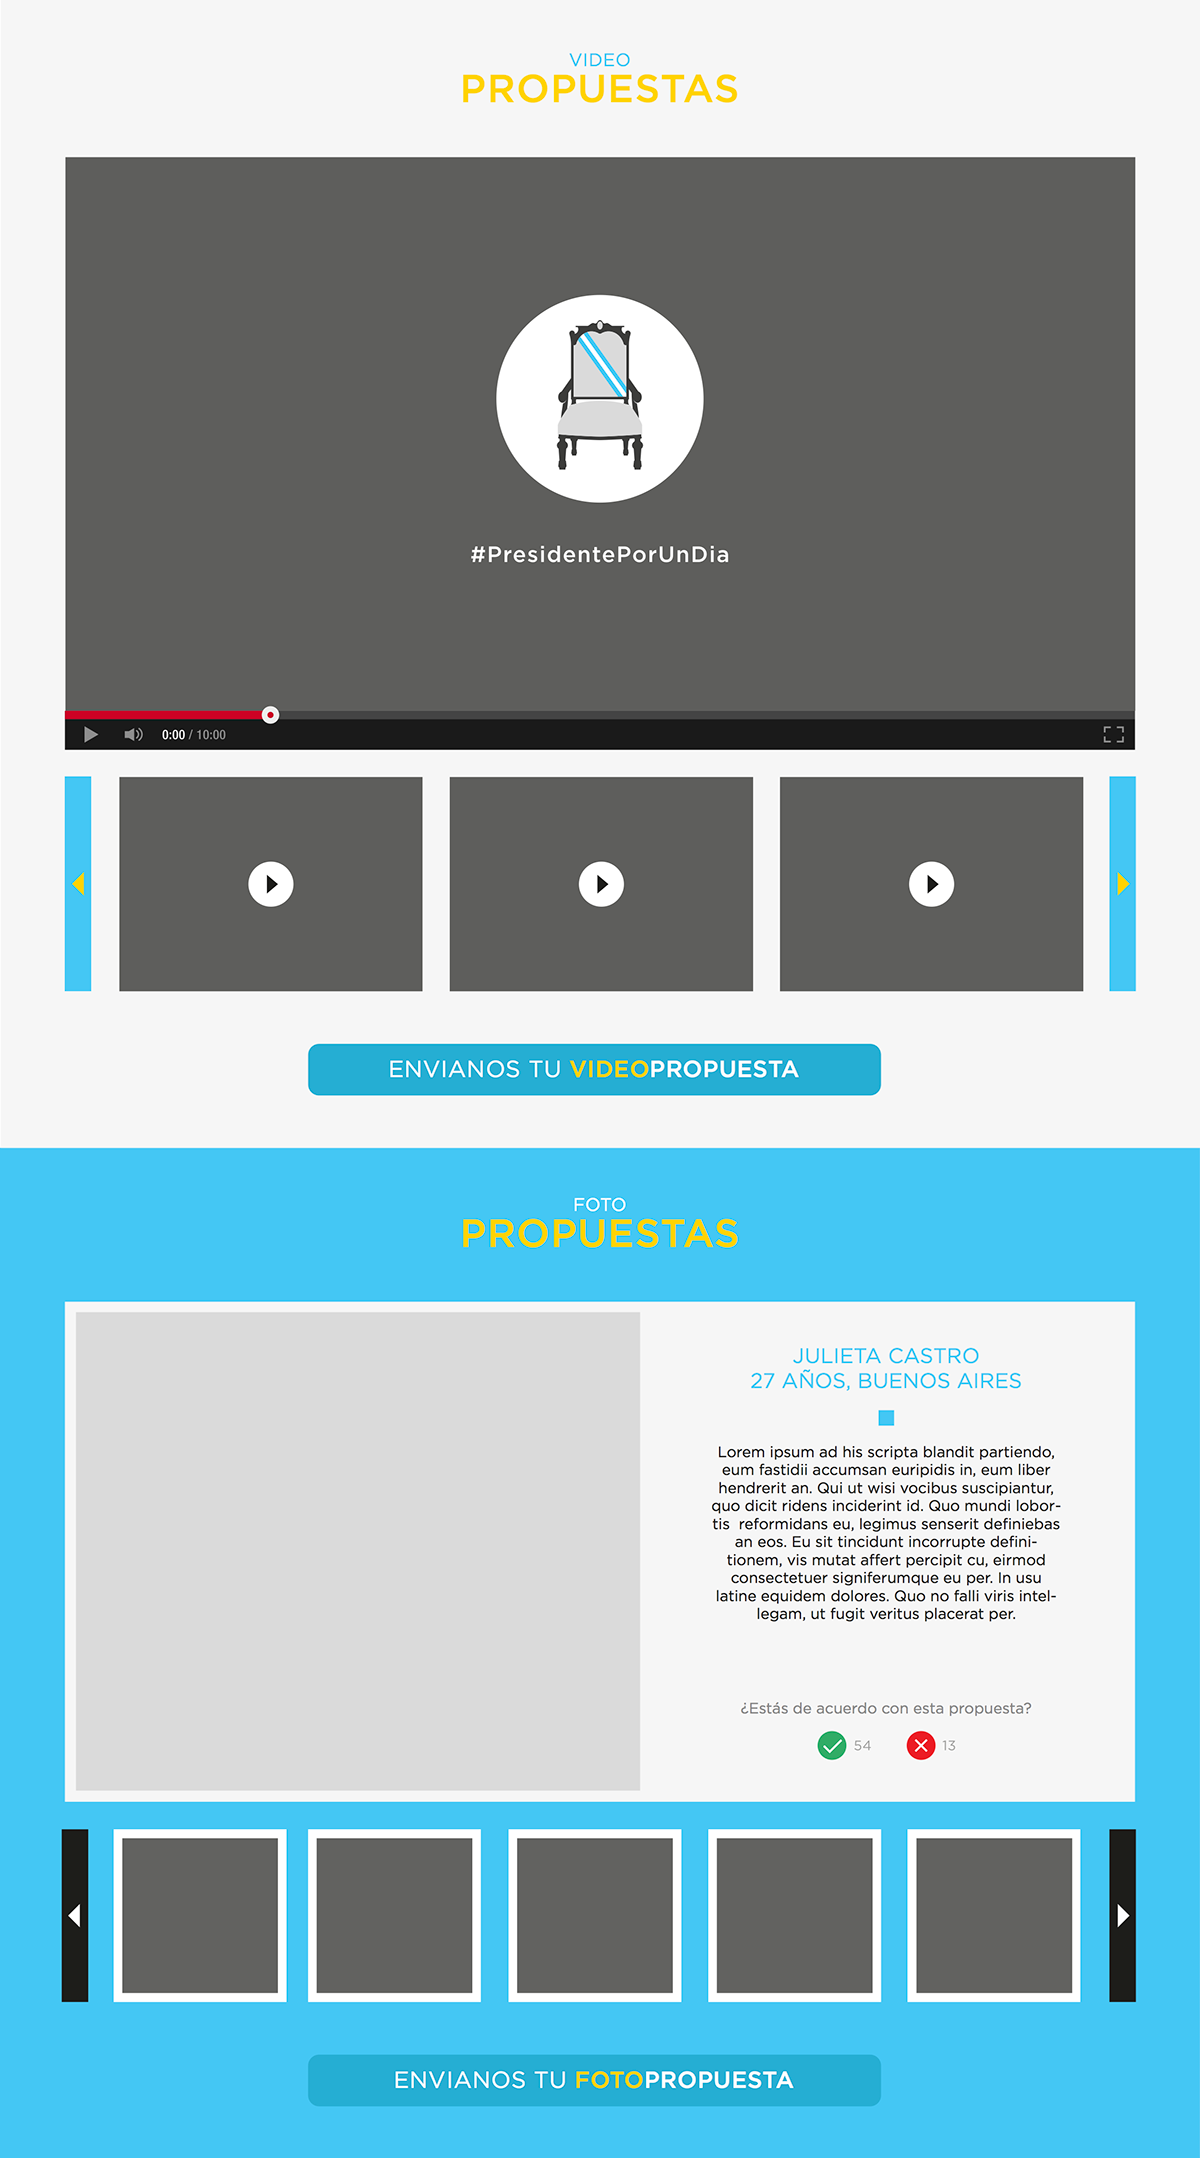 html5 css3 bootstrap jquery JavaScript php Responsive Design